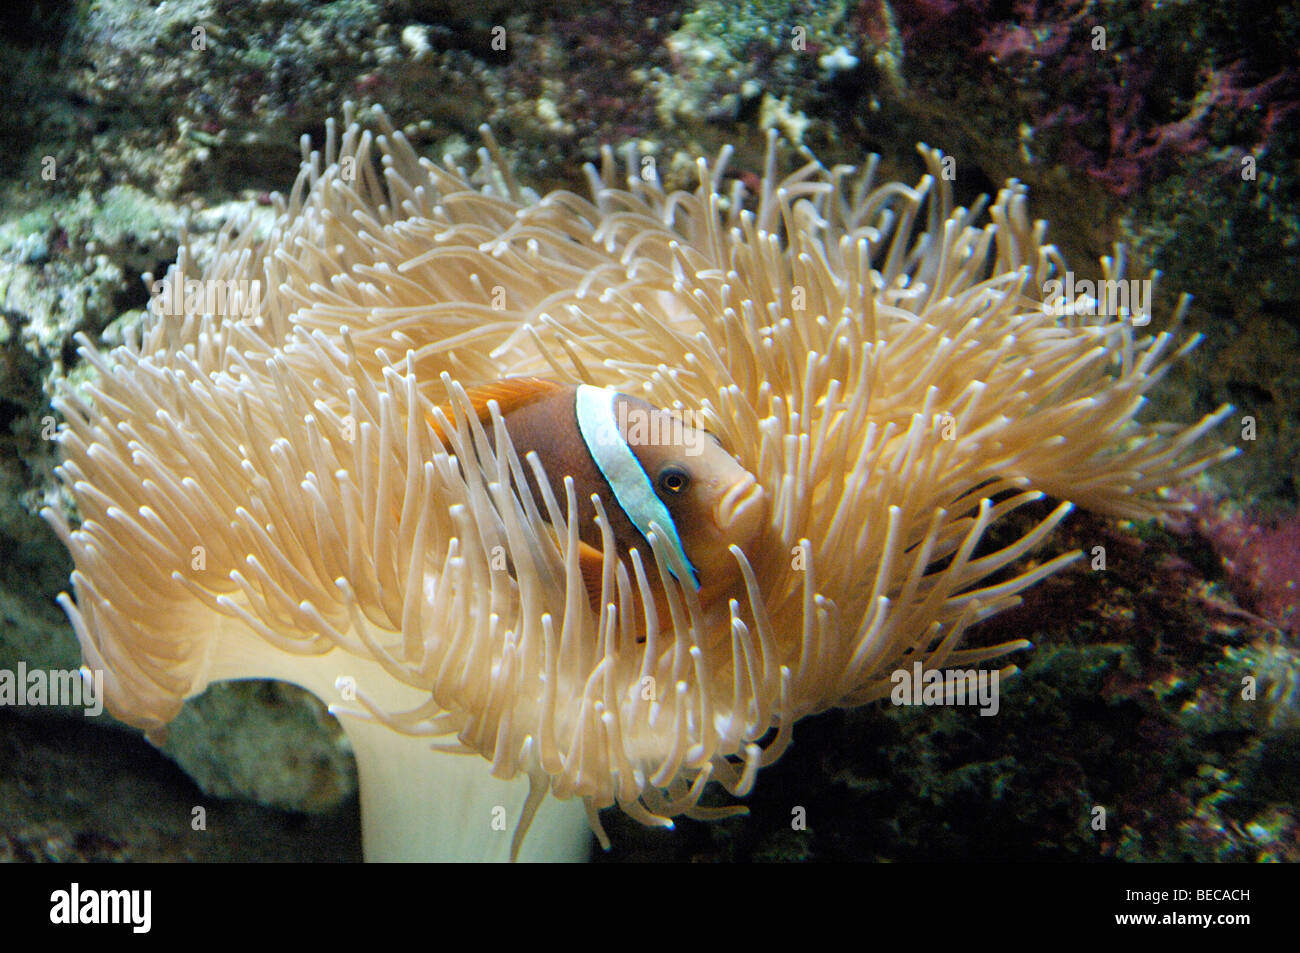 Sea Anemone (Actiniaria) with a Clownfish (Amphiprion) Stock Photo